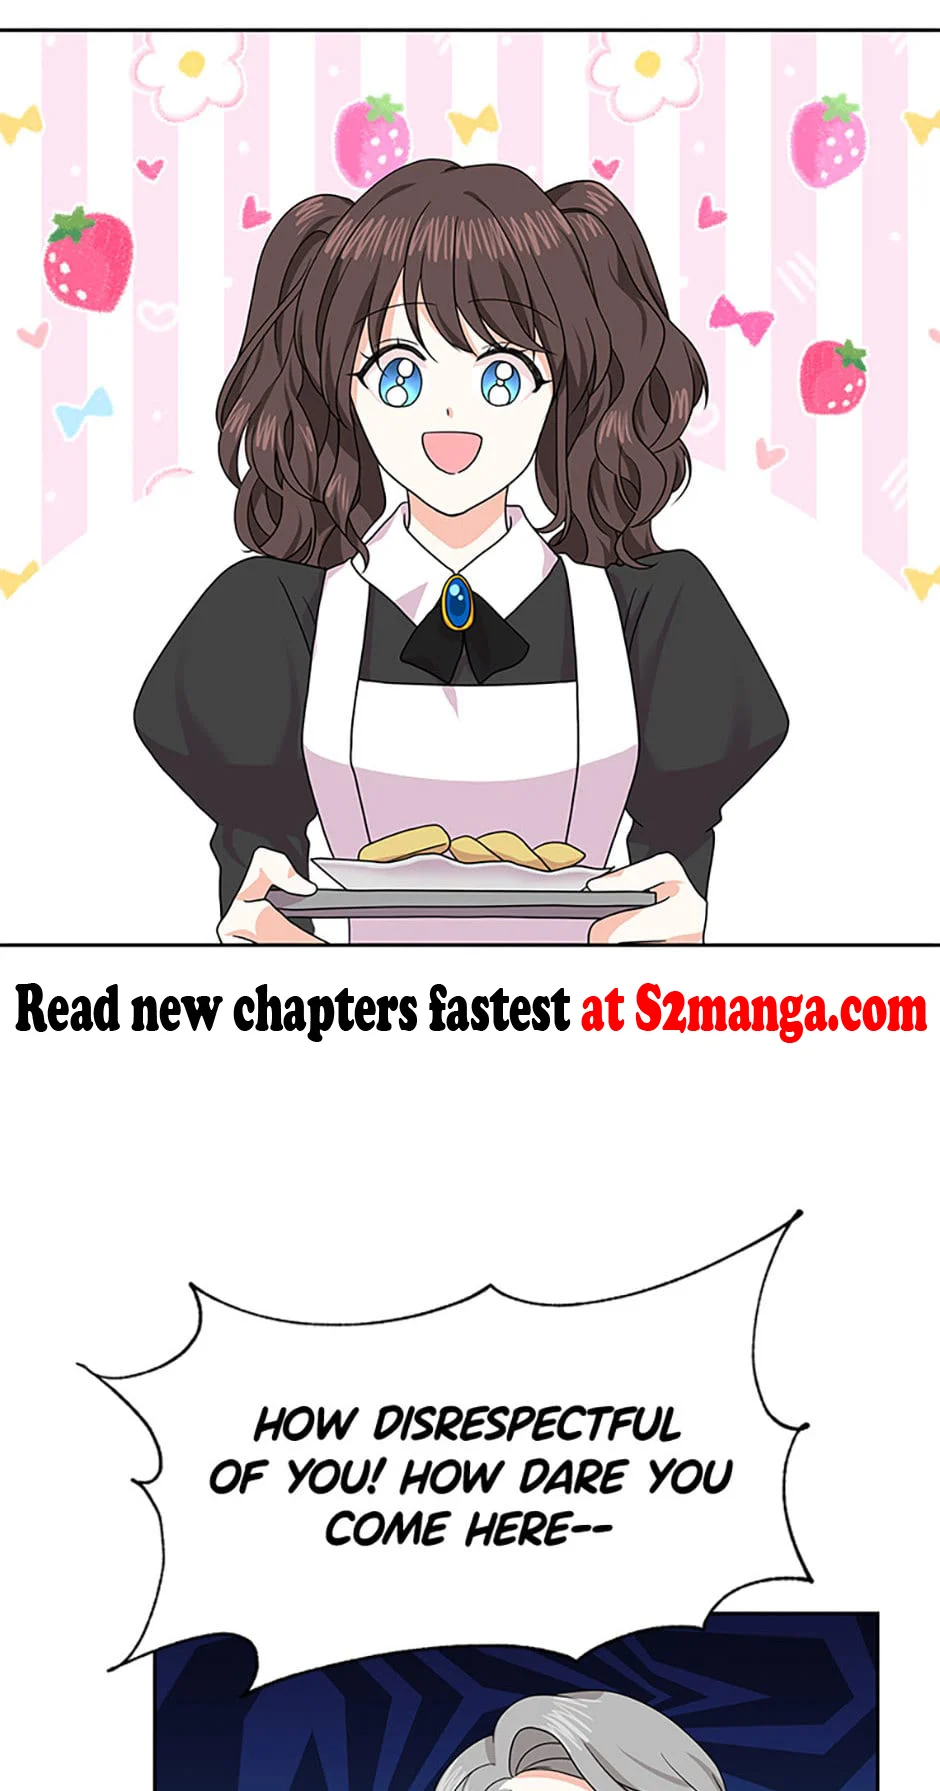 She came back and opened a dessert shop chapter 35